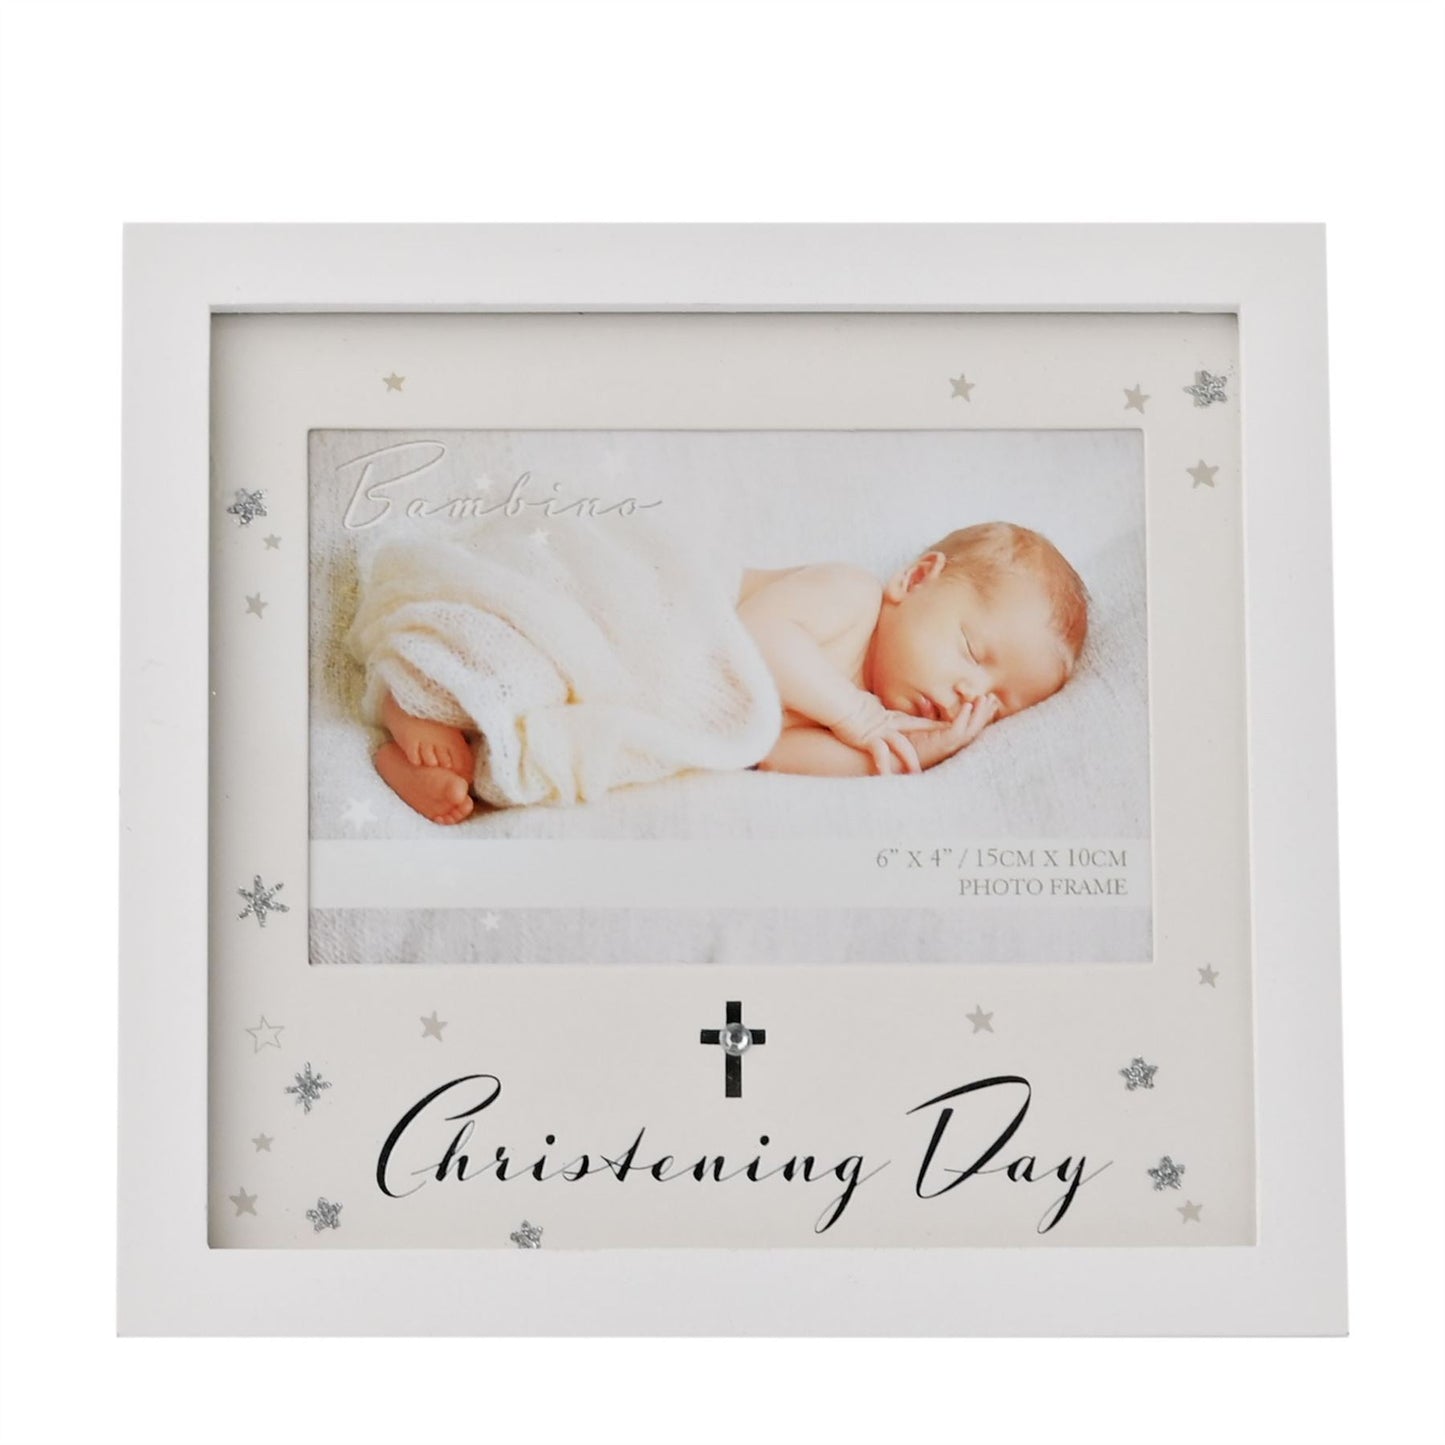 Bambino Frame with Star - Christening Day 6" x 4"